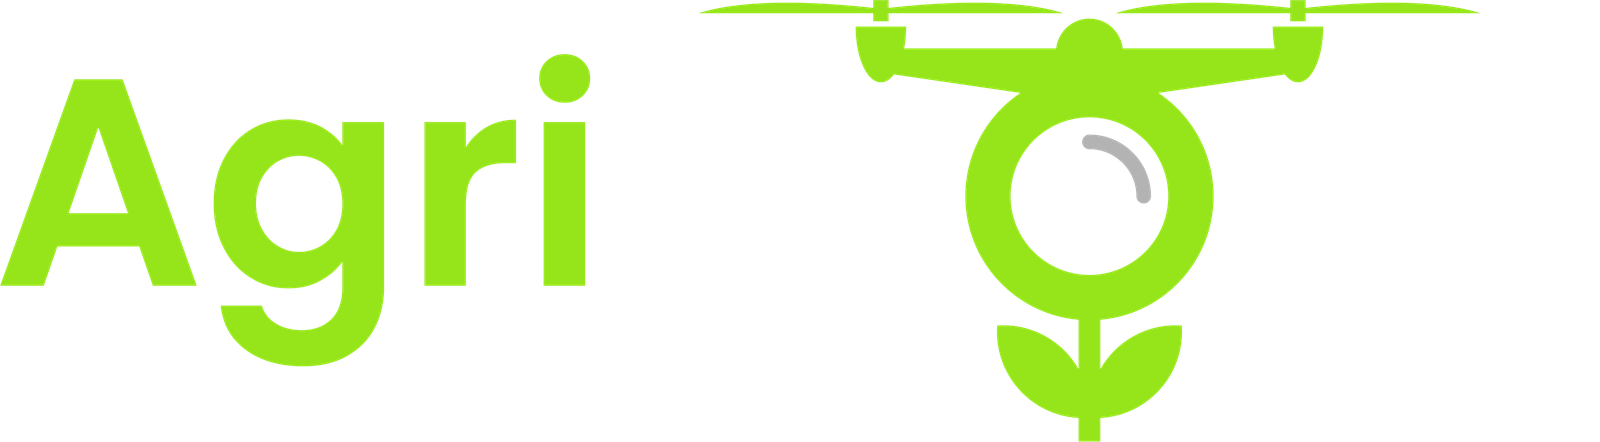 AgriDrone Services lime green and white transparent logo